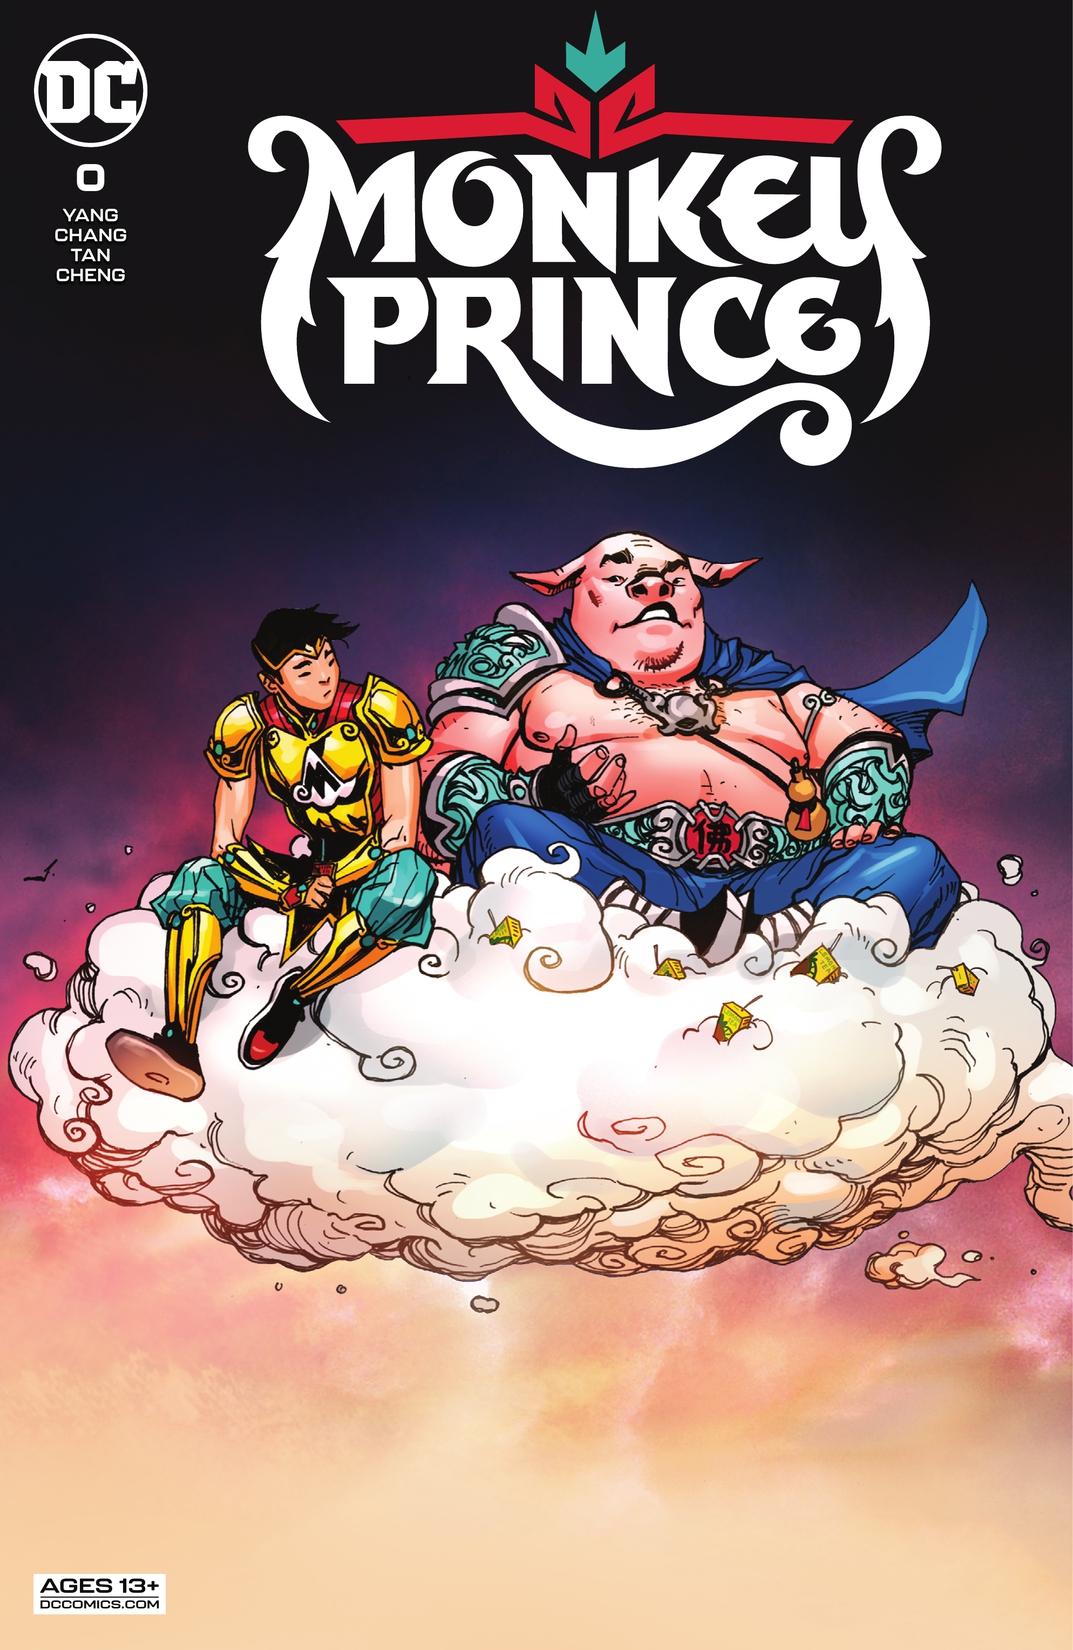 Monkey Prince #0 preview images